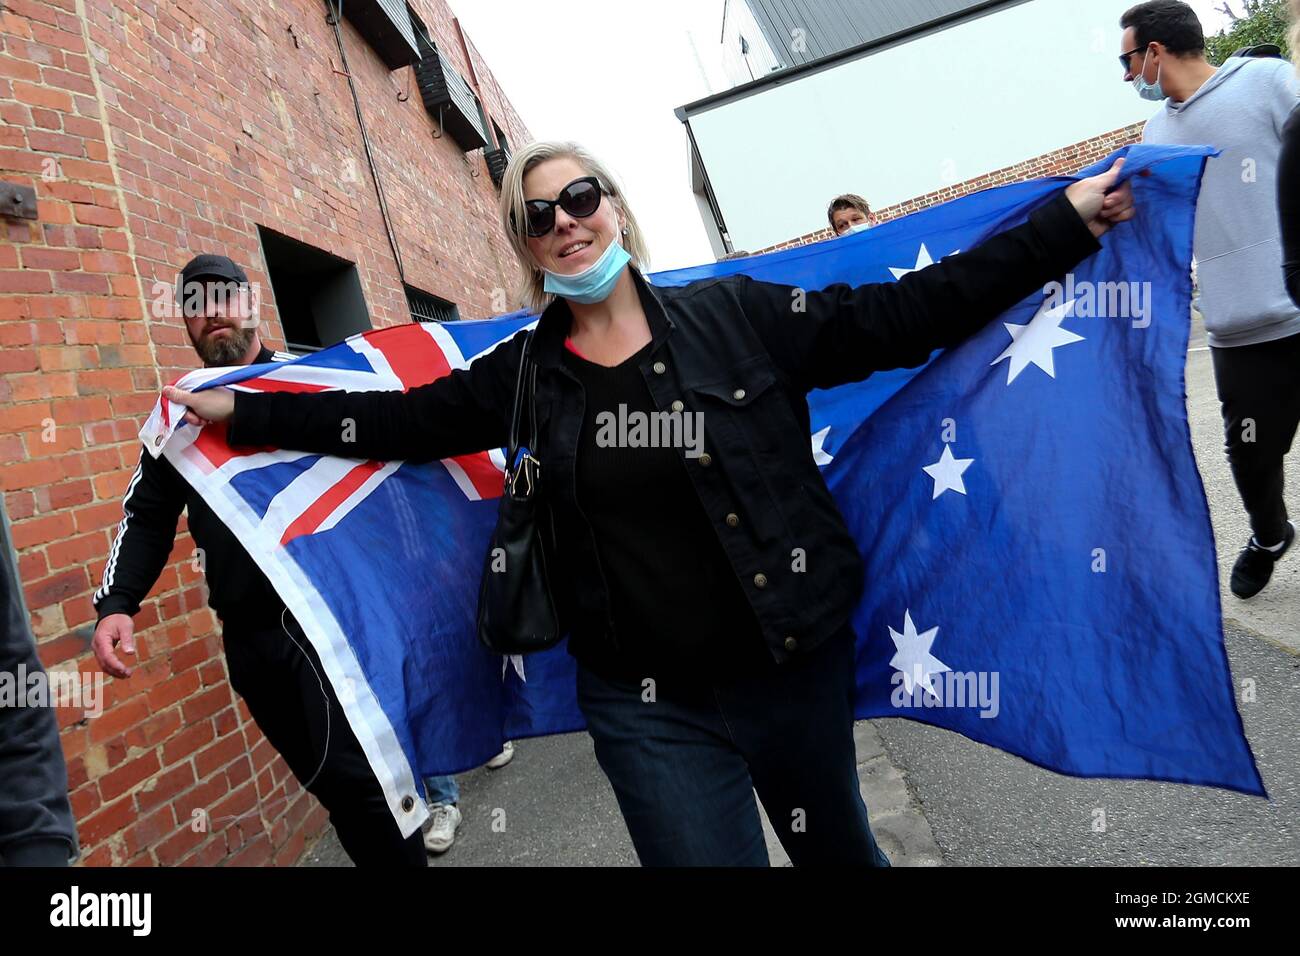 Melbourne, Australia, 18 September, 2021. A protester holds up an Australian flag during the Freedom protest on September 18, 2021 in Melbourne, Australia. Freedom protests are part of an international co-ordinated protest movement targeting governments COVID-19 restrictions, vaccination, and public health efforts.  Credit: Dave Hewison/Speed Media/Alamy Live News Stock Photo